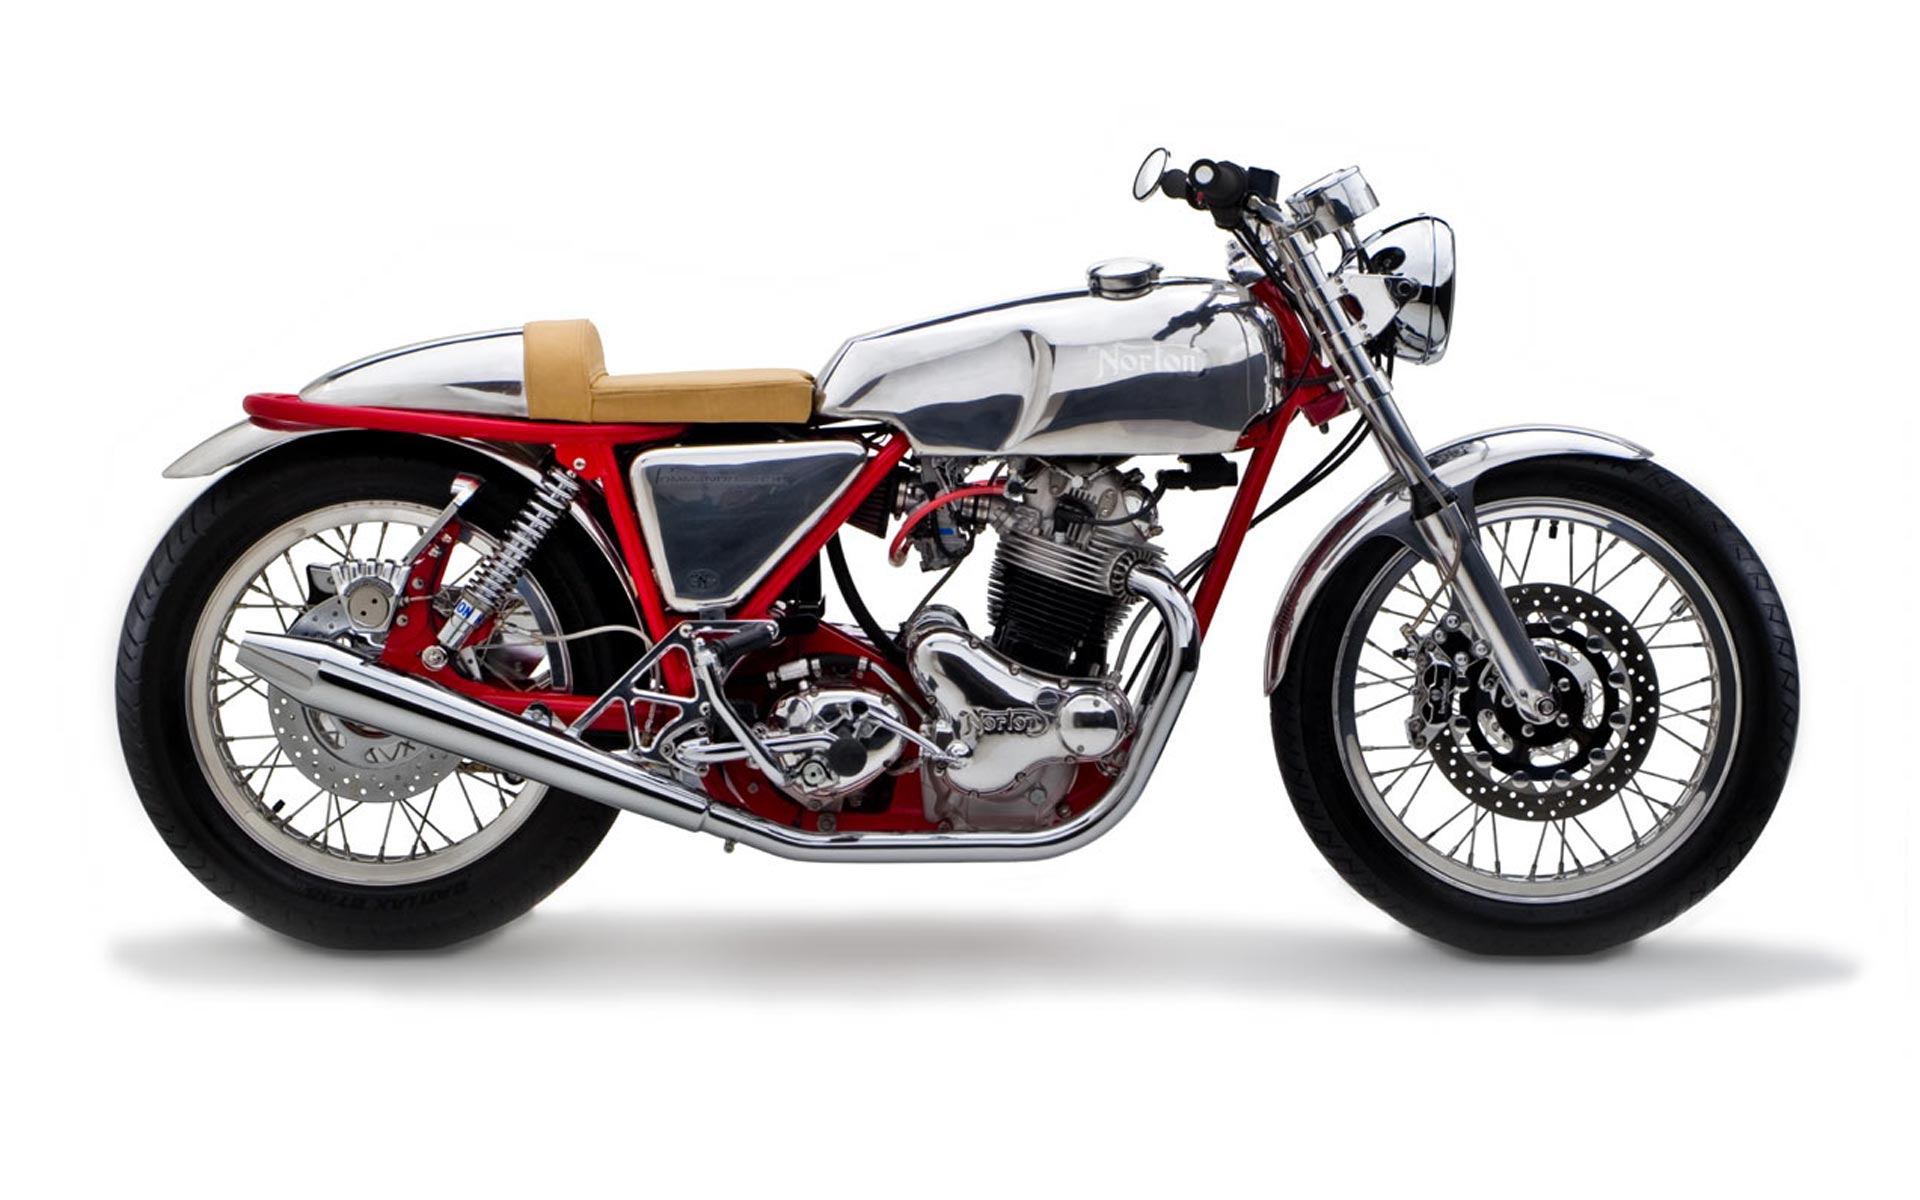 Motorcycle British HD Wallpaper And Make This For